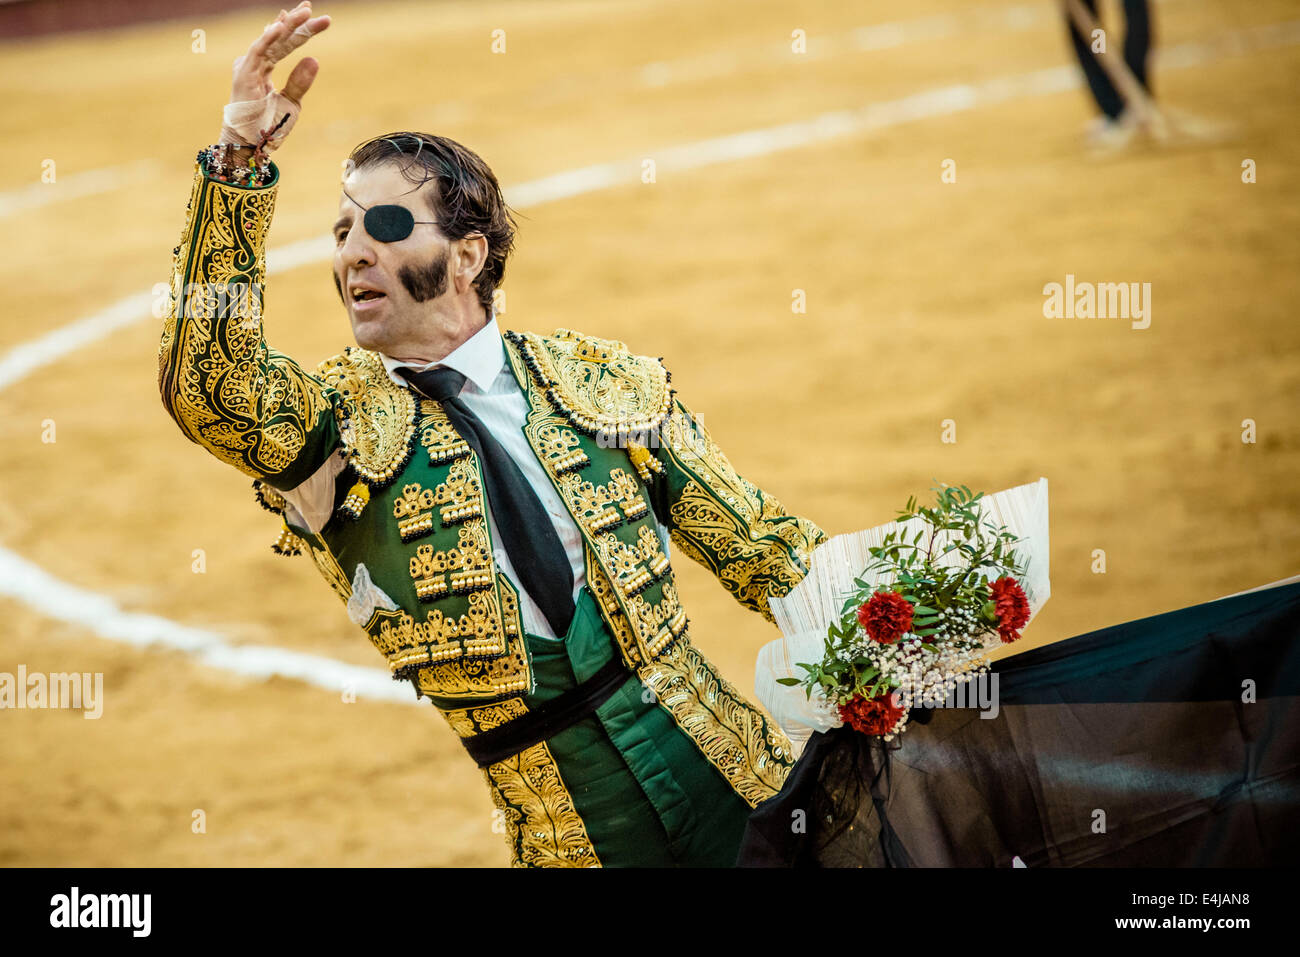 Spanish bullfighter JUAN JOSE PADILLA celebrates the end of a bullfight at the Plaza Toros de Valencia bullring during the Fallas Festival 2014 - A couple of thousand spectators gave Juan Jose Padilla a hero's welcome in the Plaza de Toros of Valencia during the Fallas Festival. Padilla wears an eyepatch - gaining the nickname 'The Pirate' - since he was badly injured by a bull in 2011. Stock Photo